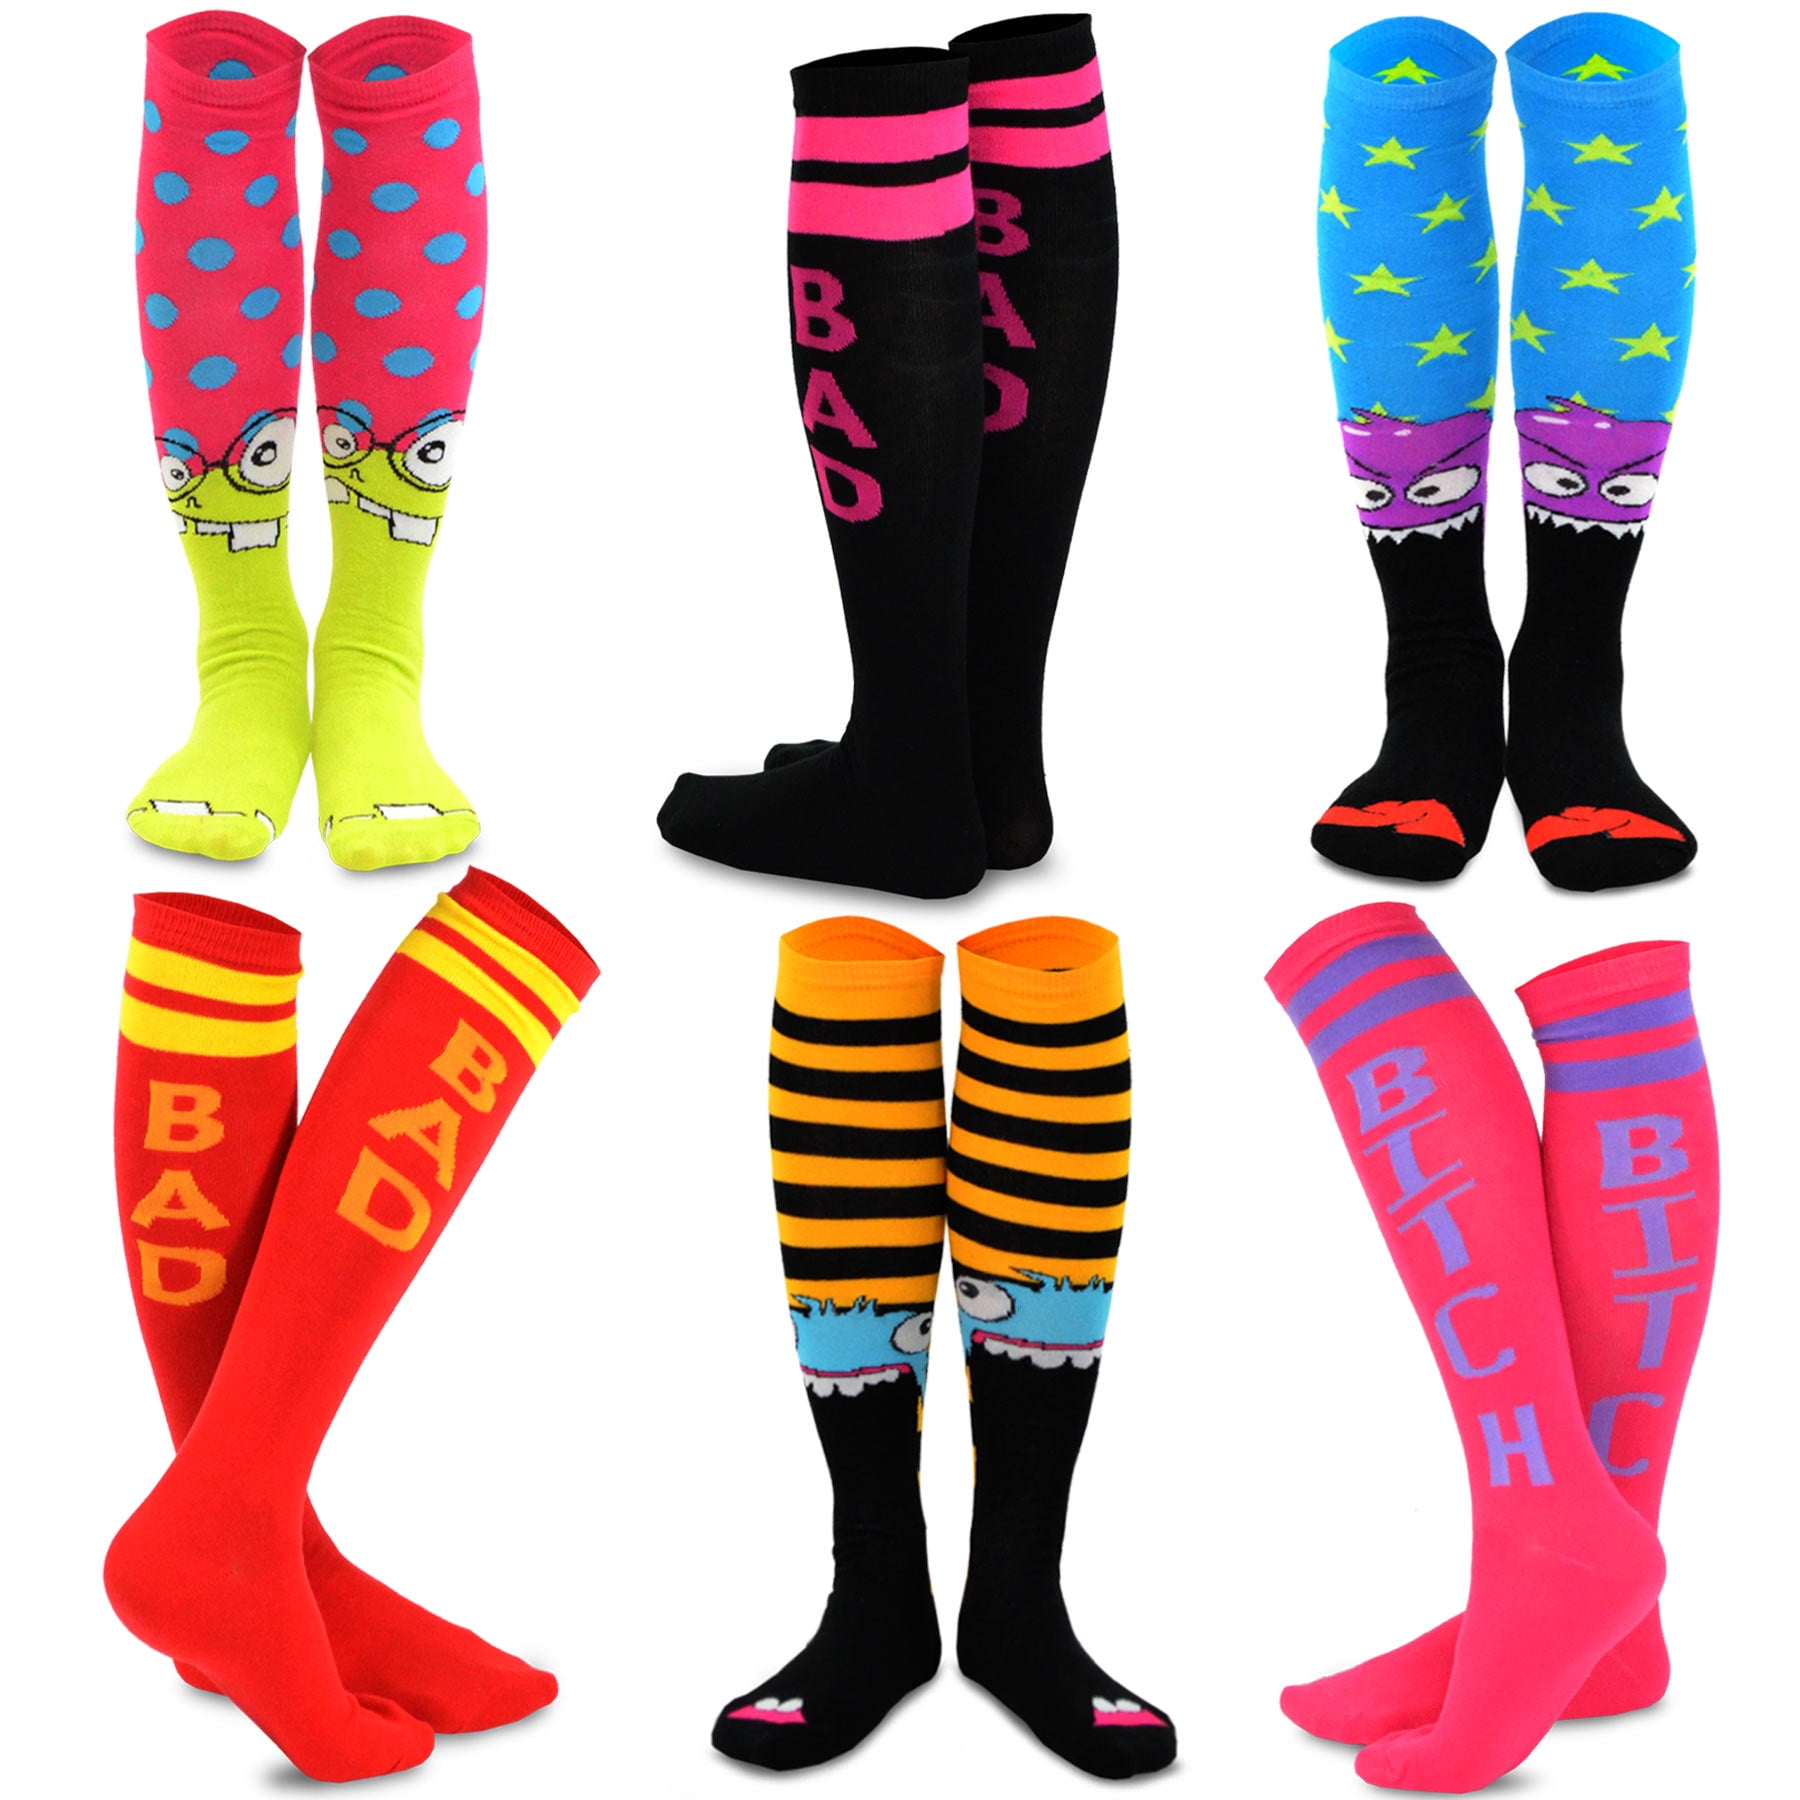 French Fries Cotton Casual Colorful Fun Below Knee High Athletic Socks 